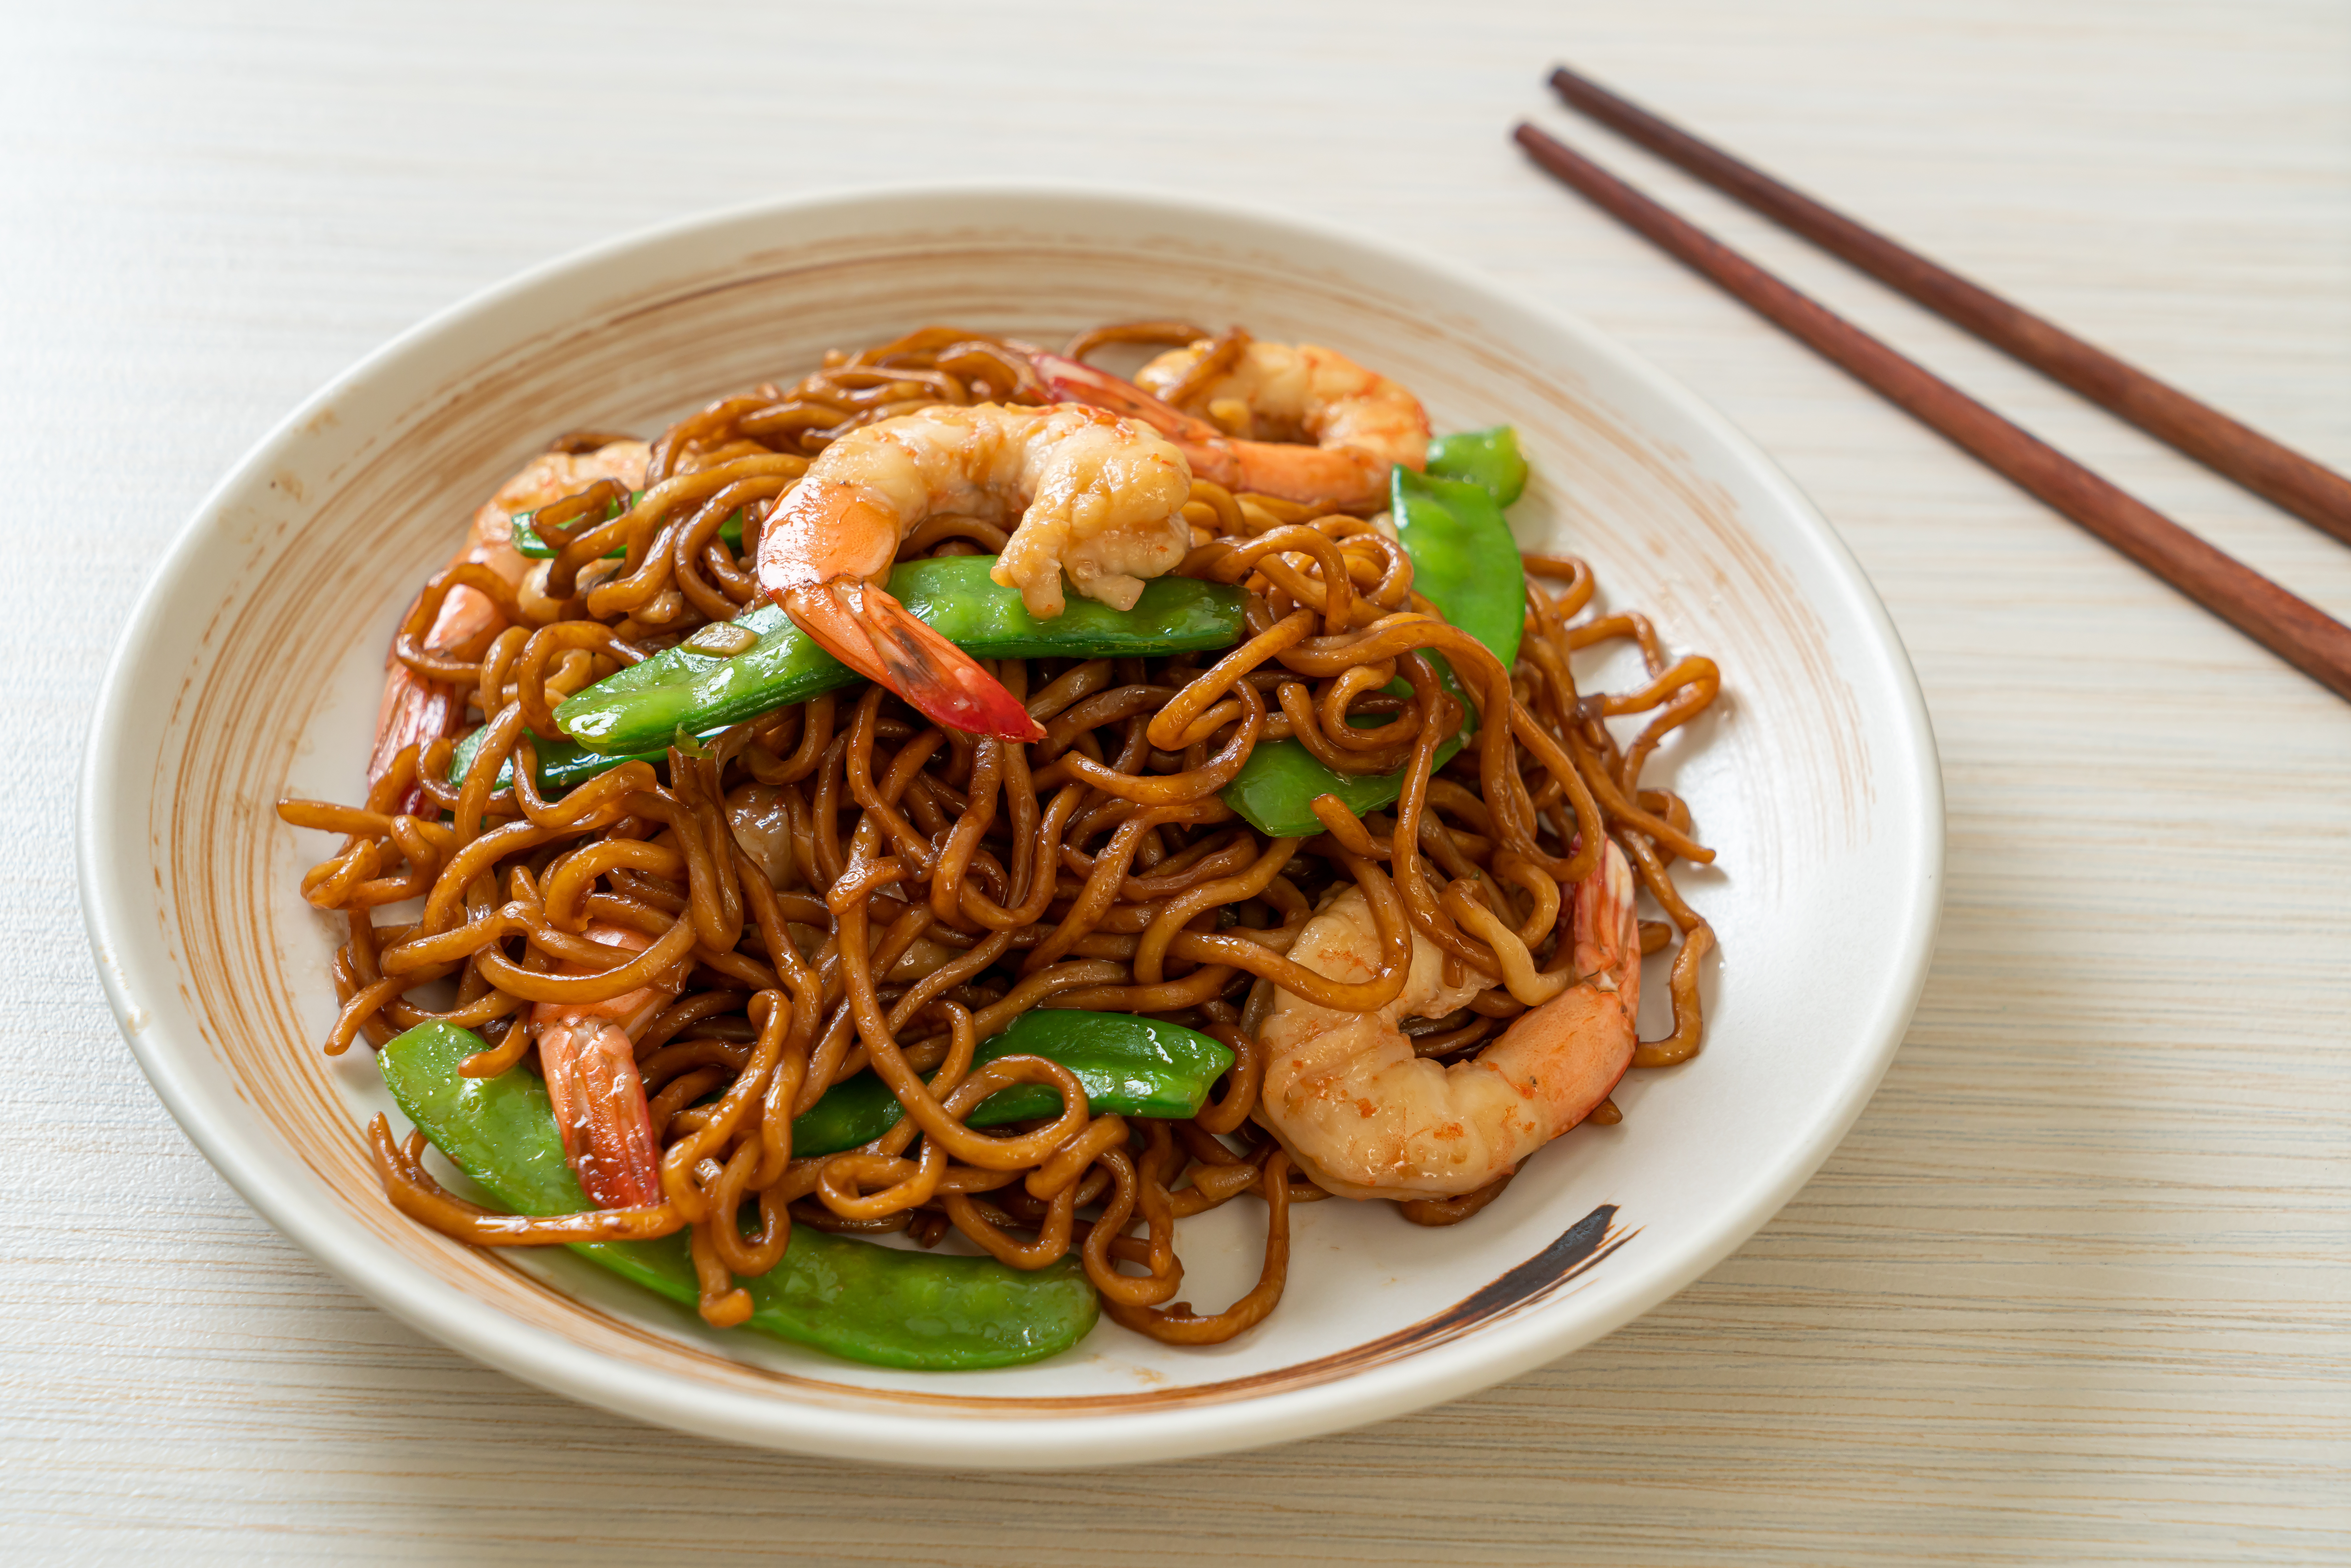 stir-fried-yakisoba-noodles-with-green-peas-shrimps-asian-food-style